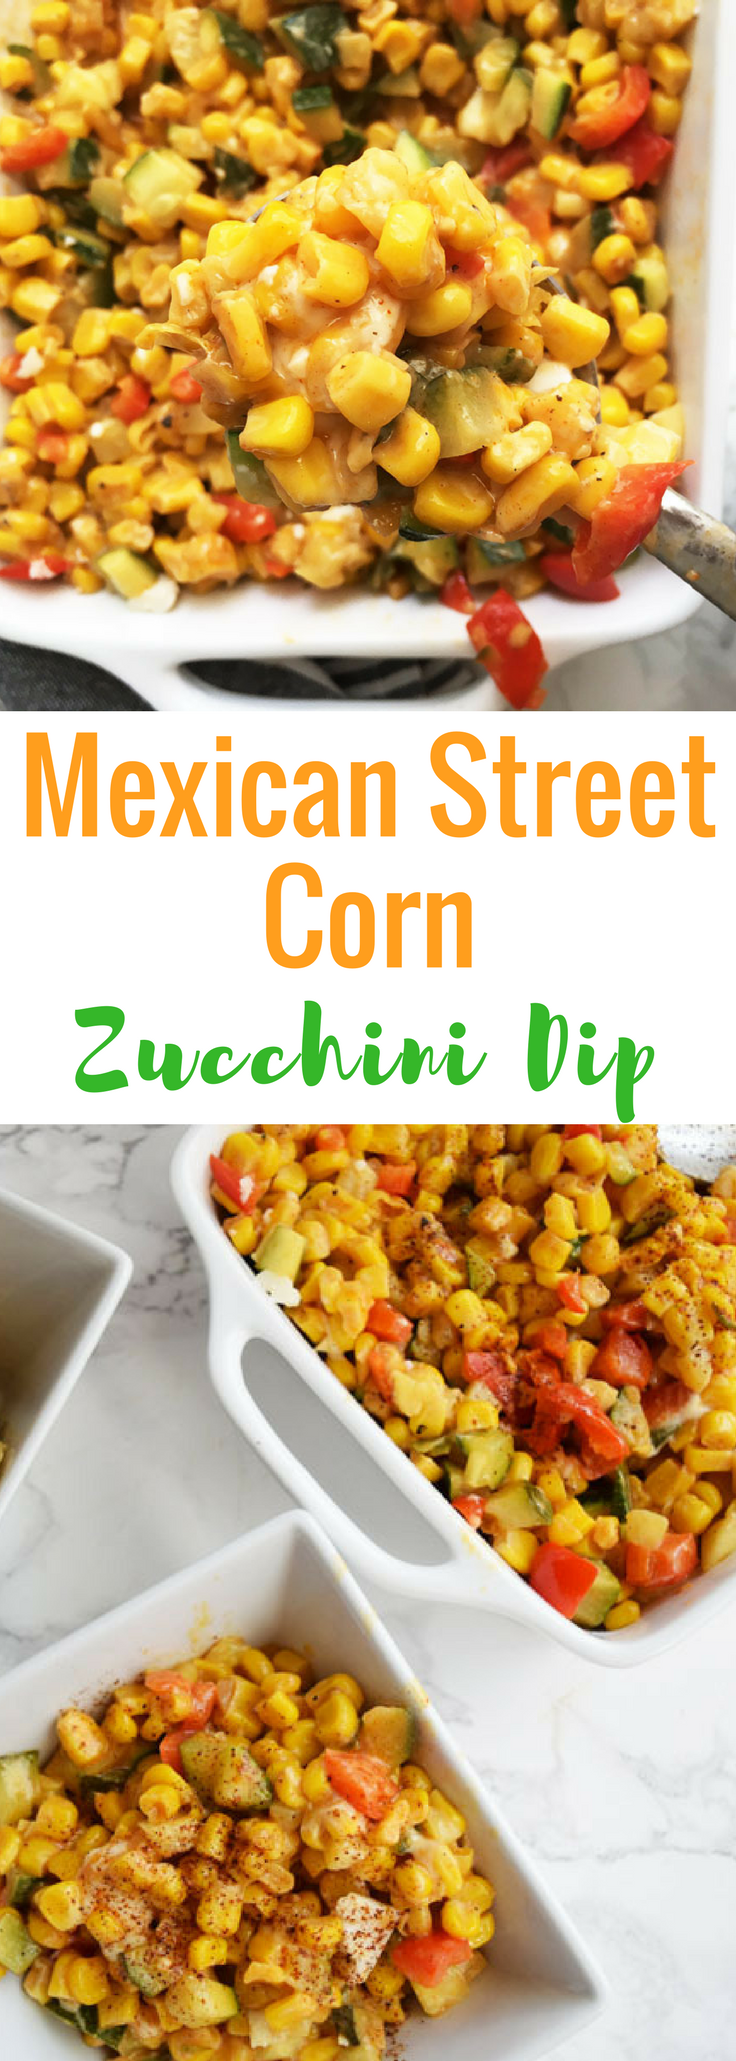 A delicious, cheesy and veggie filled Mexican Street Corn Dip with a little bit of a kick || Mexican Street Corn Zucchini Dip 